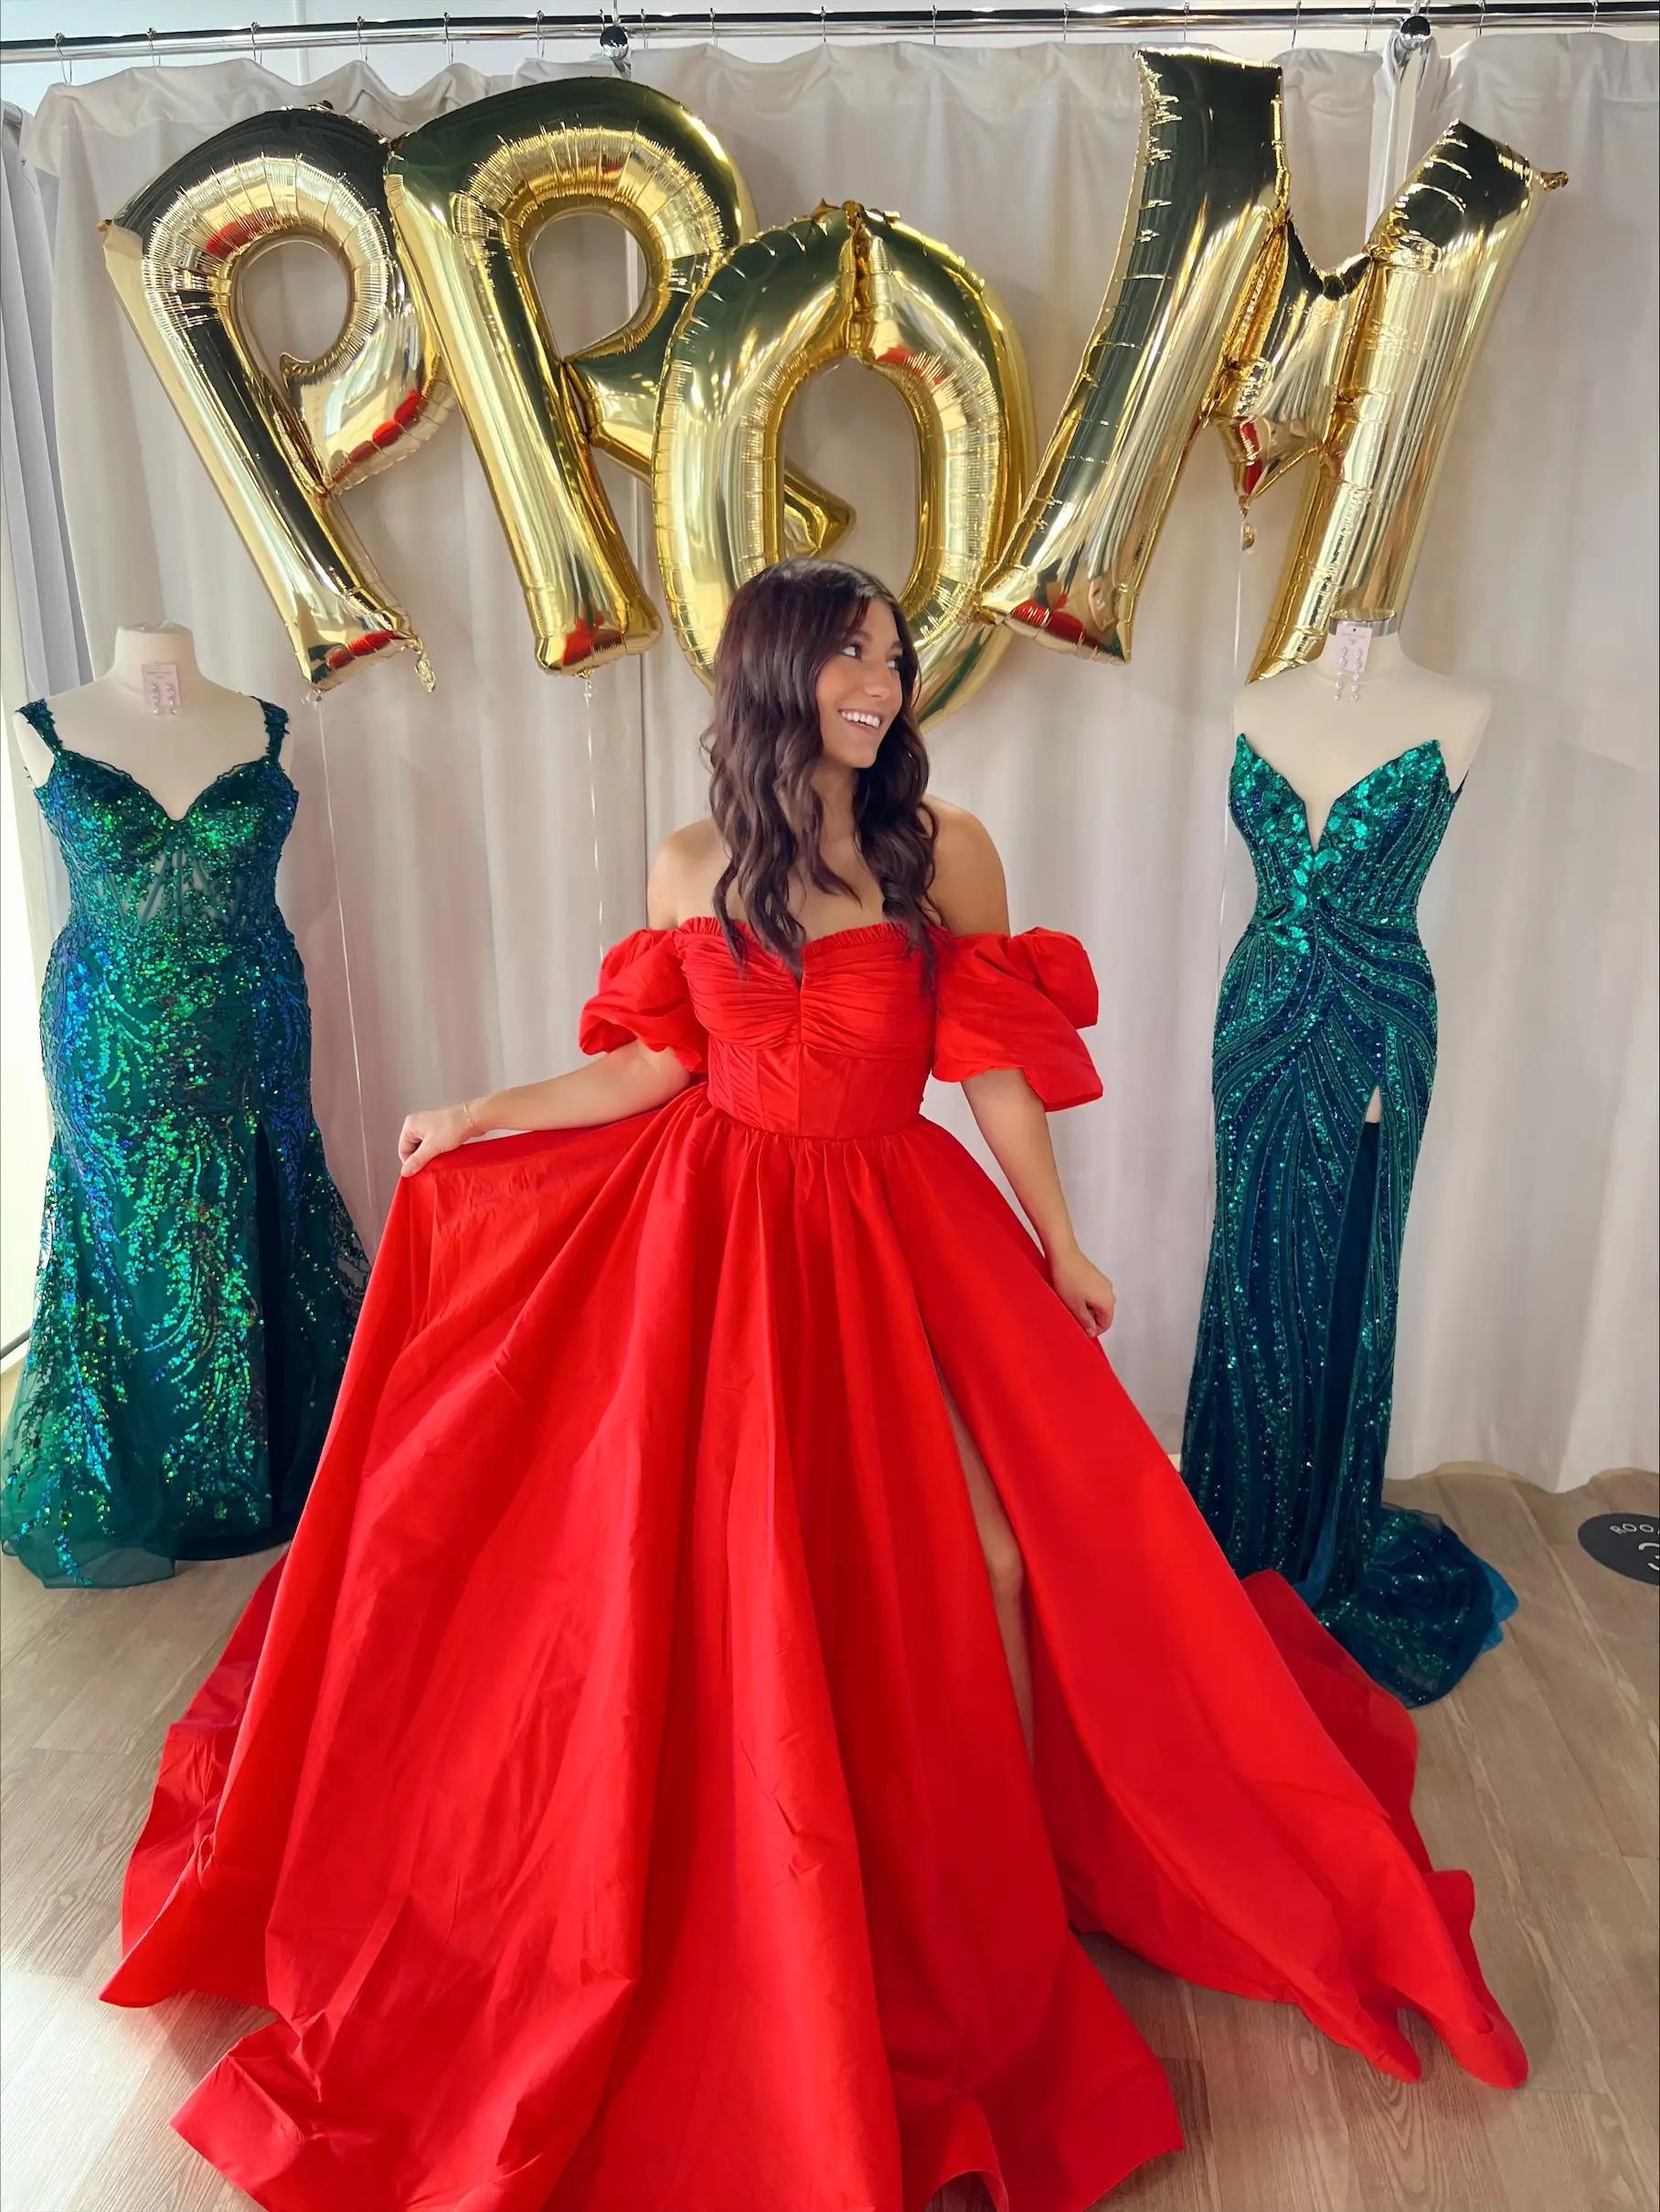 Hundreds of New Arrivals for Prom! Image